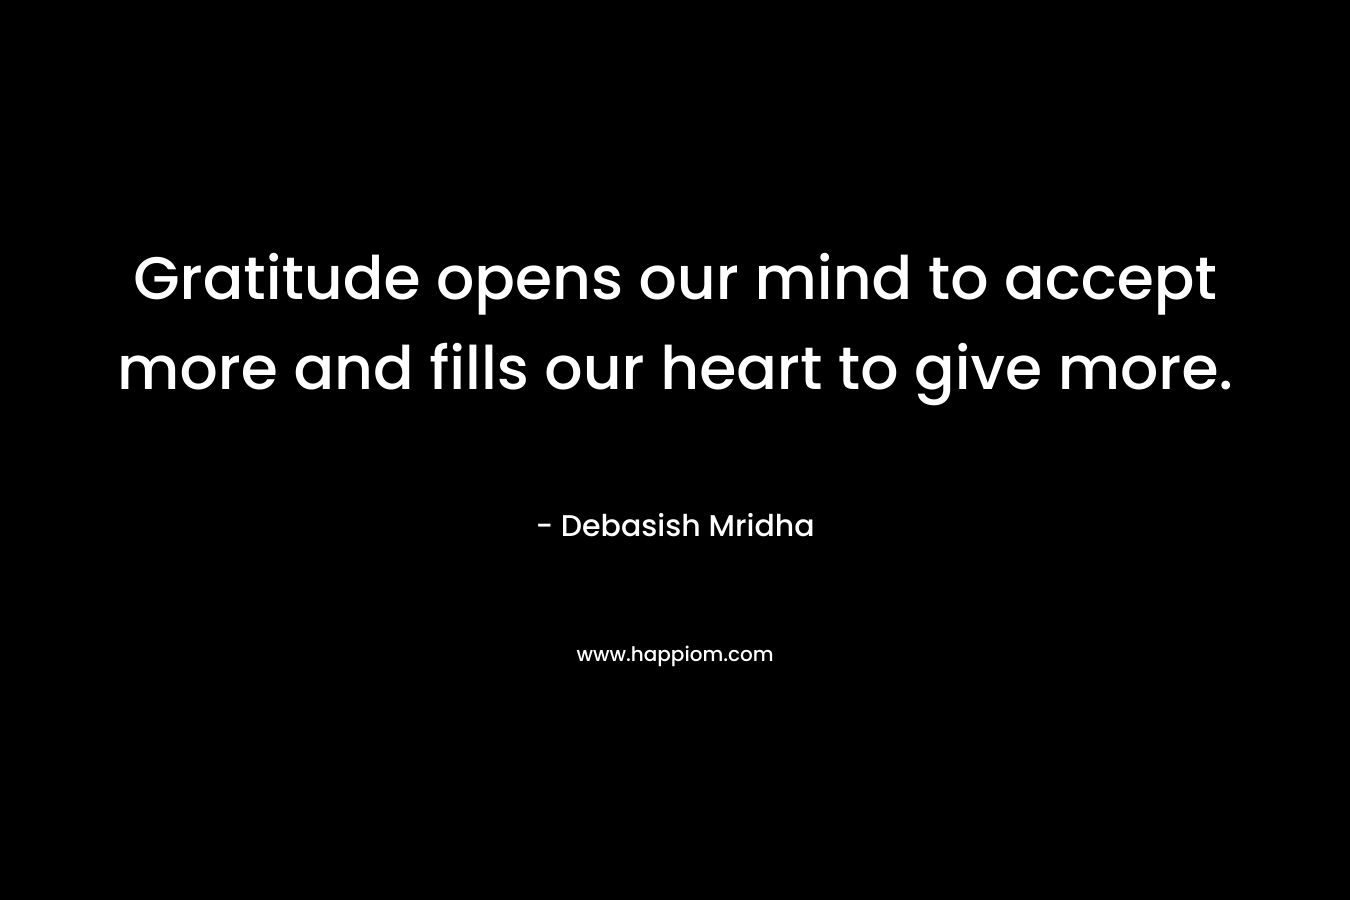 Gratitude opens our mind to accept more and fills our heart to give more.